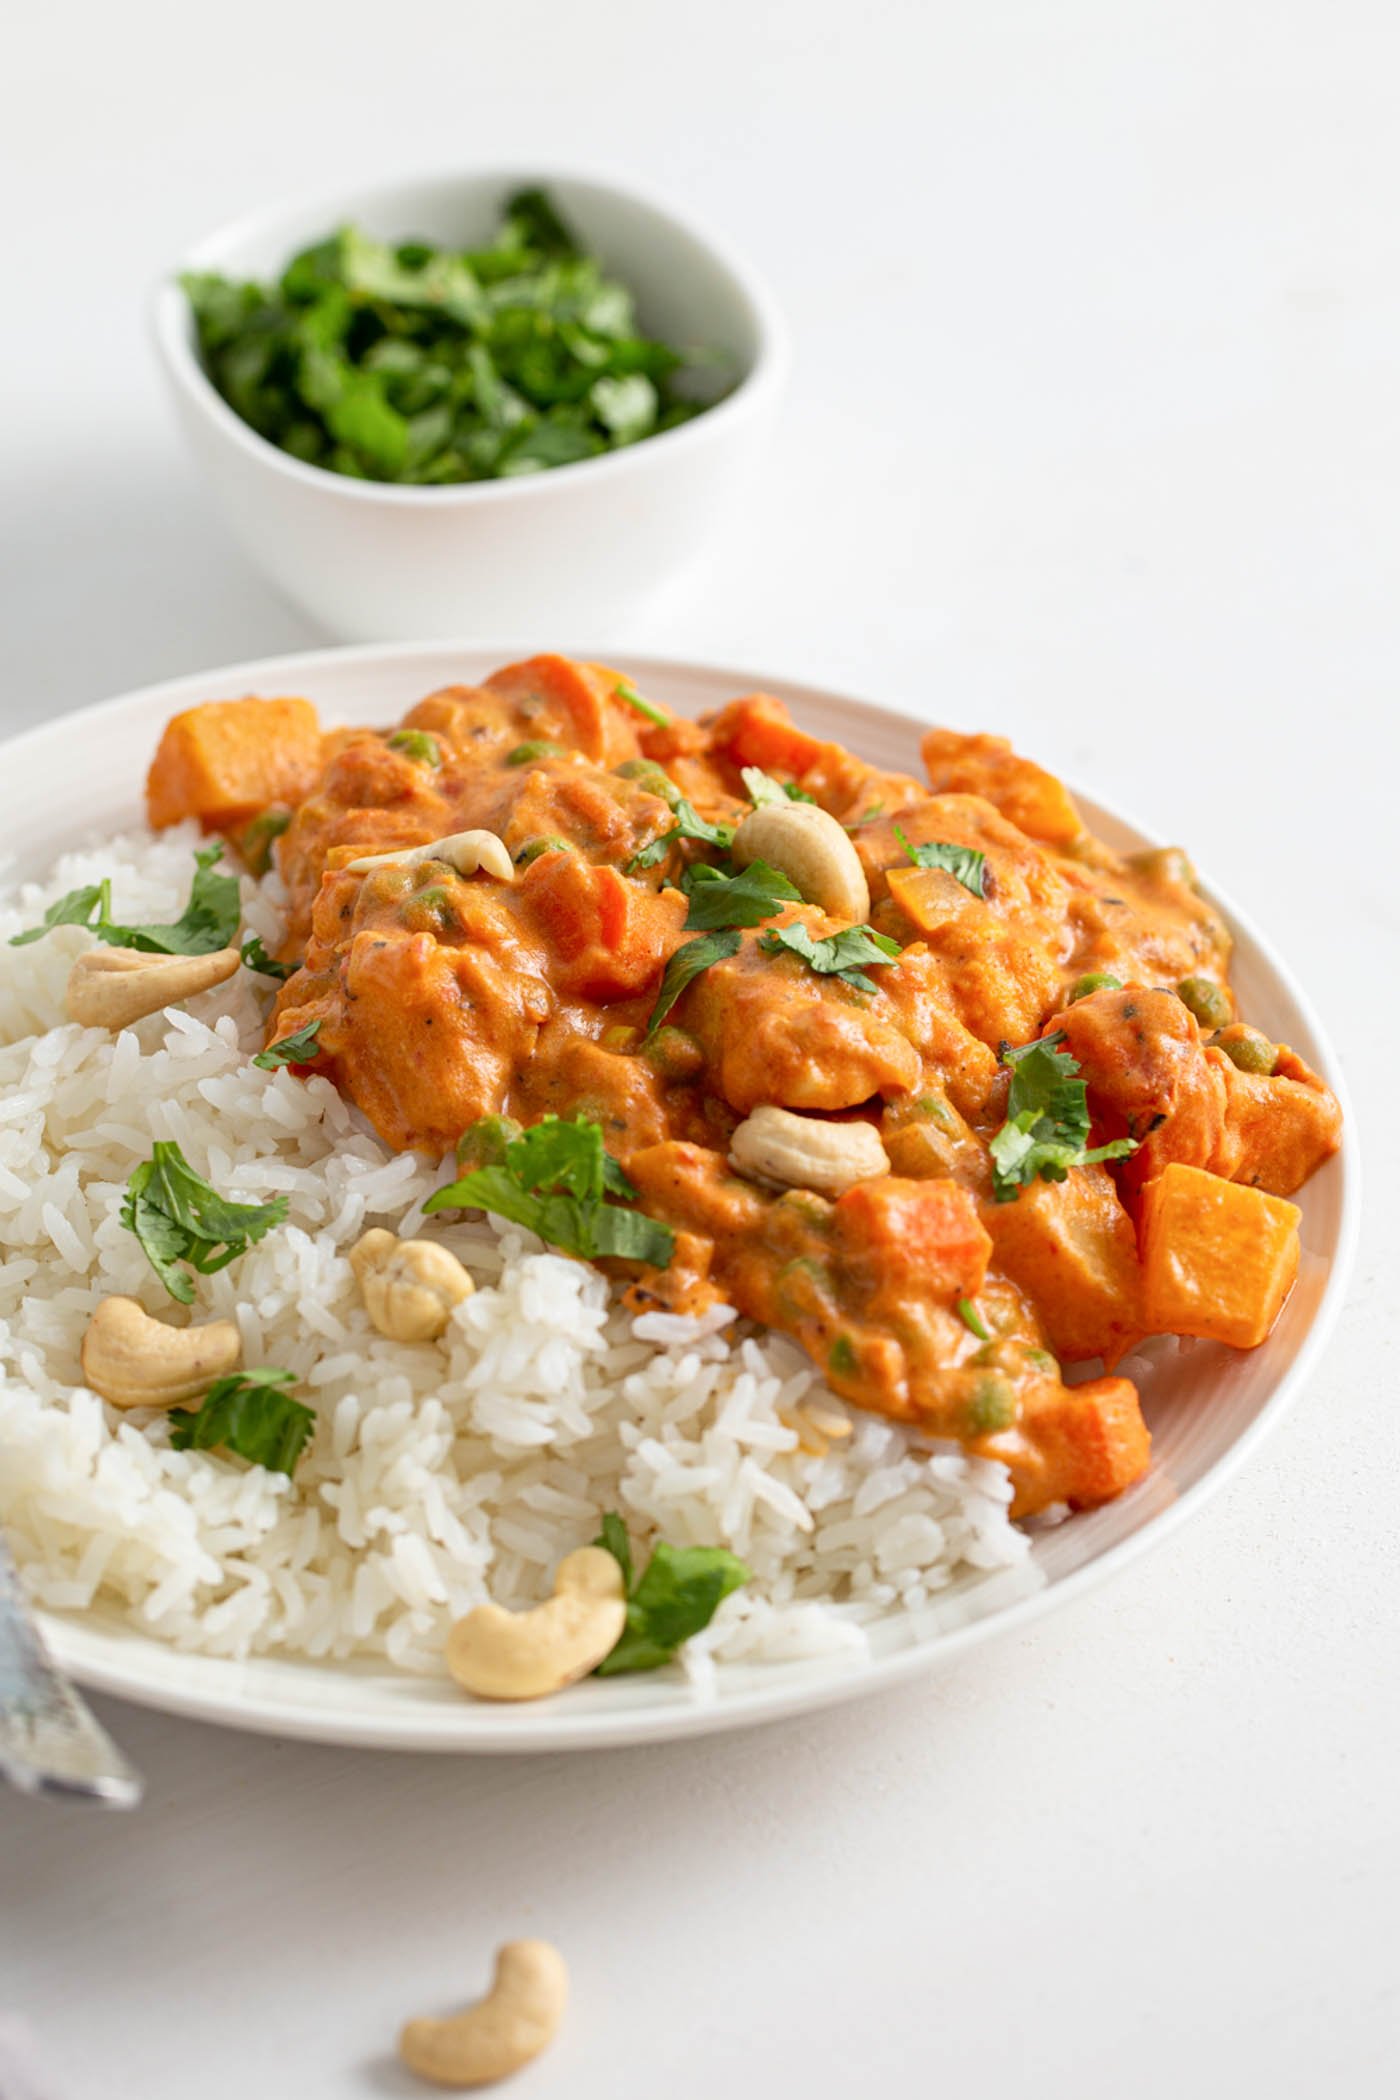 Plate of rice and vegetable korma with potatoes, carrot and celery topped with cilantro and cashews.